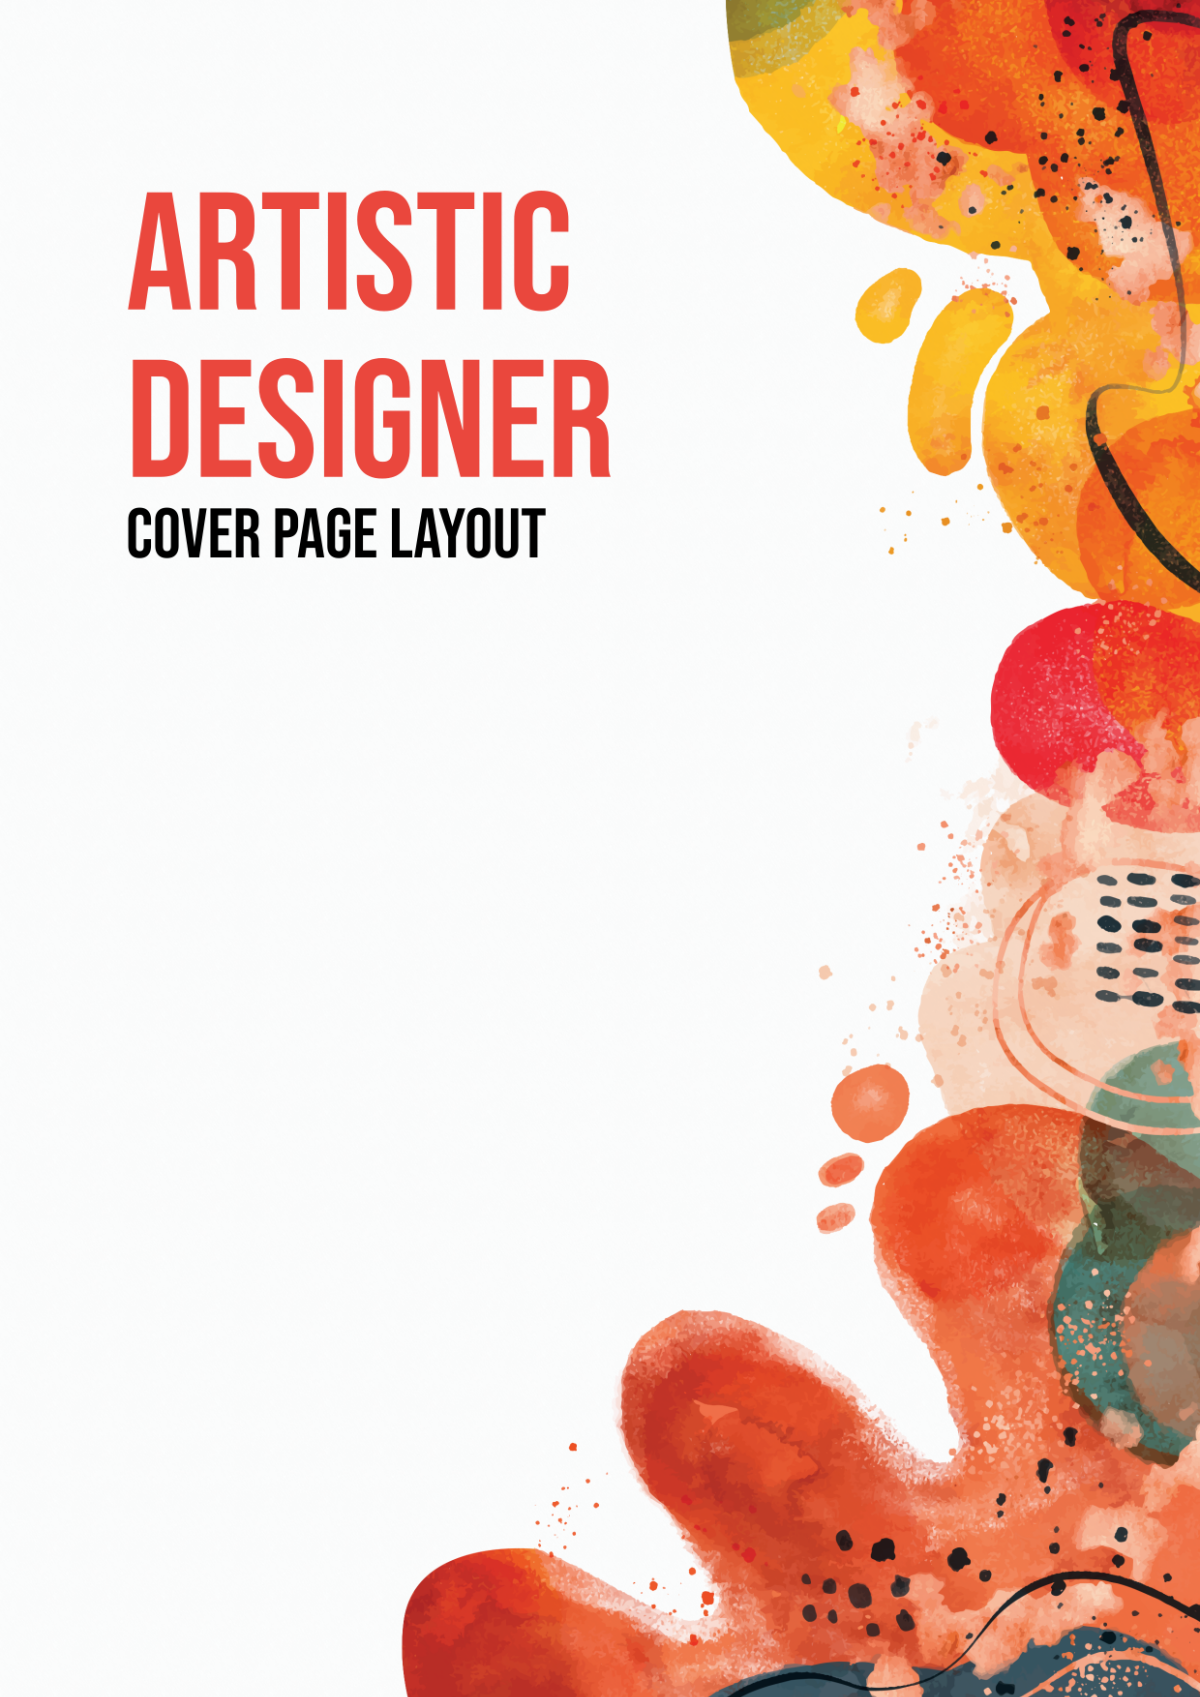 Artistic Designer Cover Page Layout Template